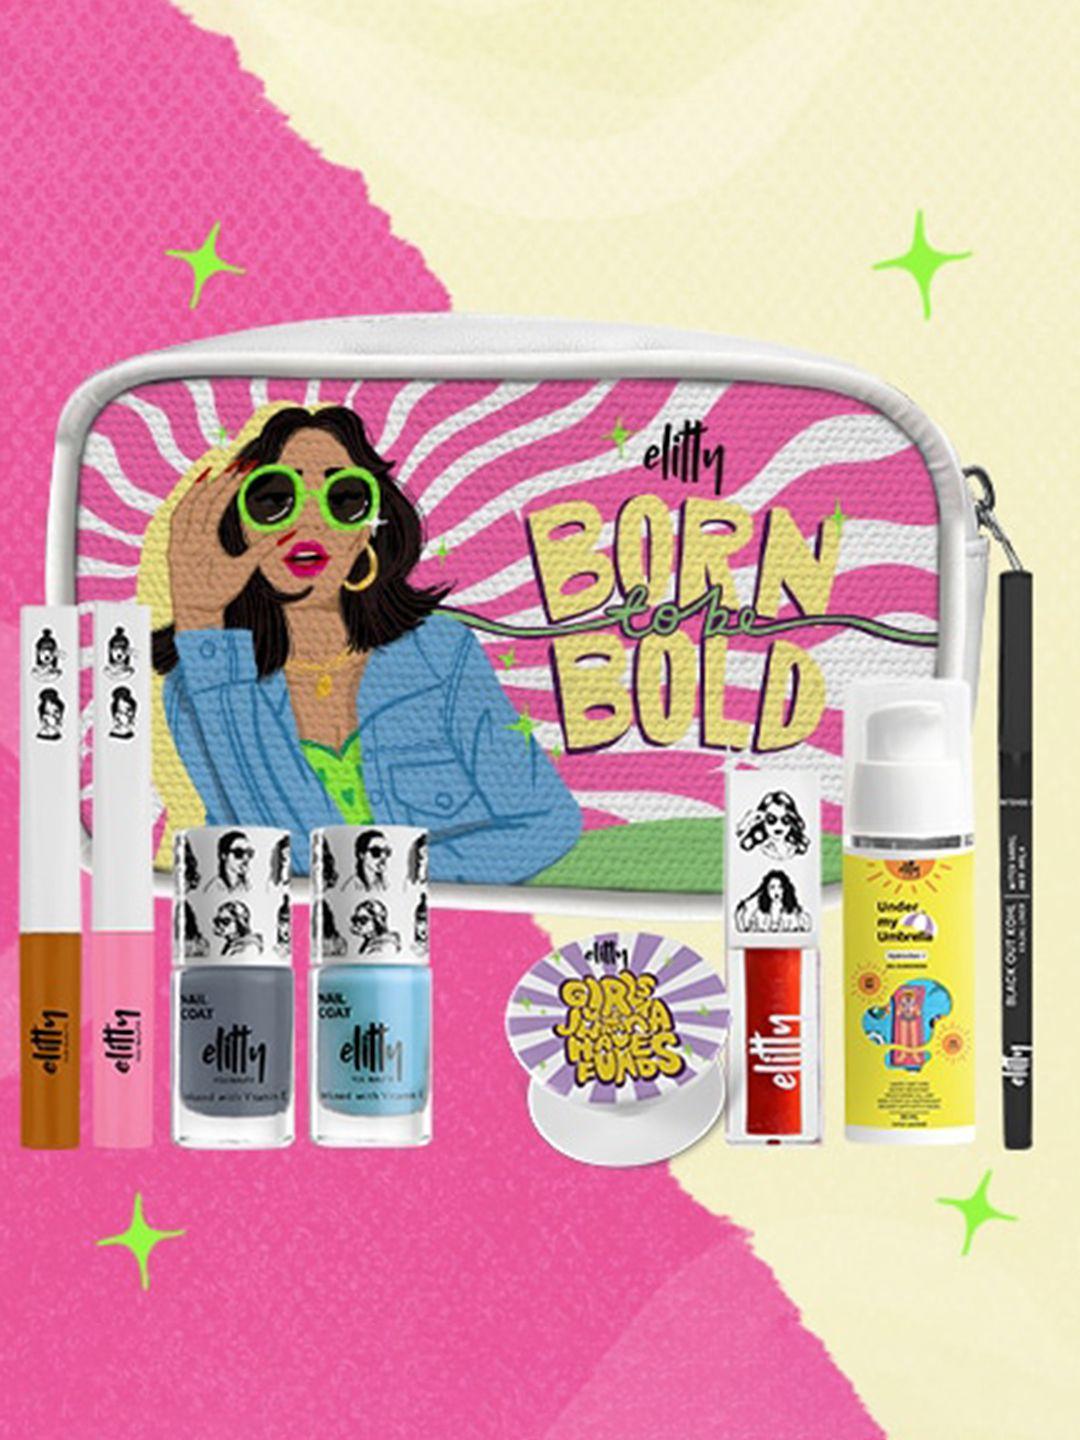 elitty born to be bold set of 7 complete makeup kit with pouch- 600gm